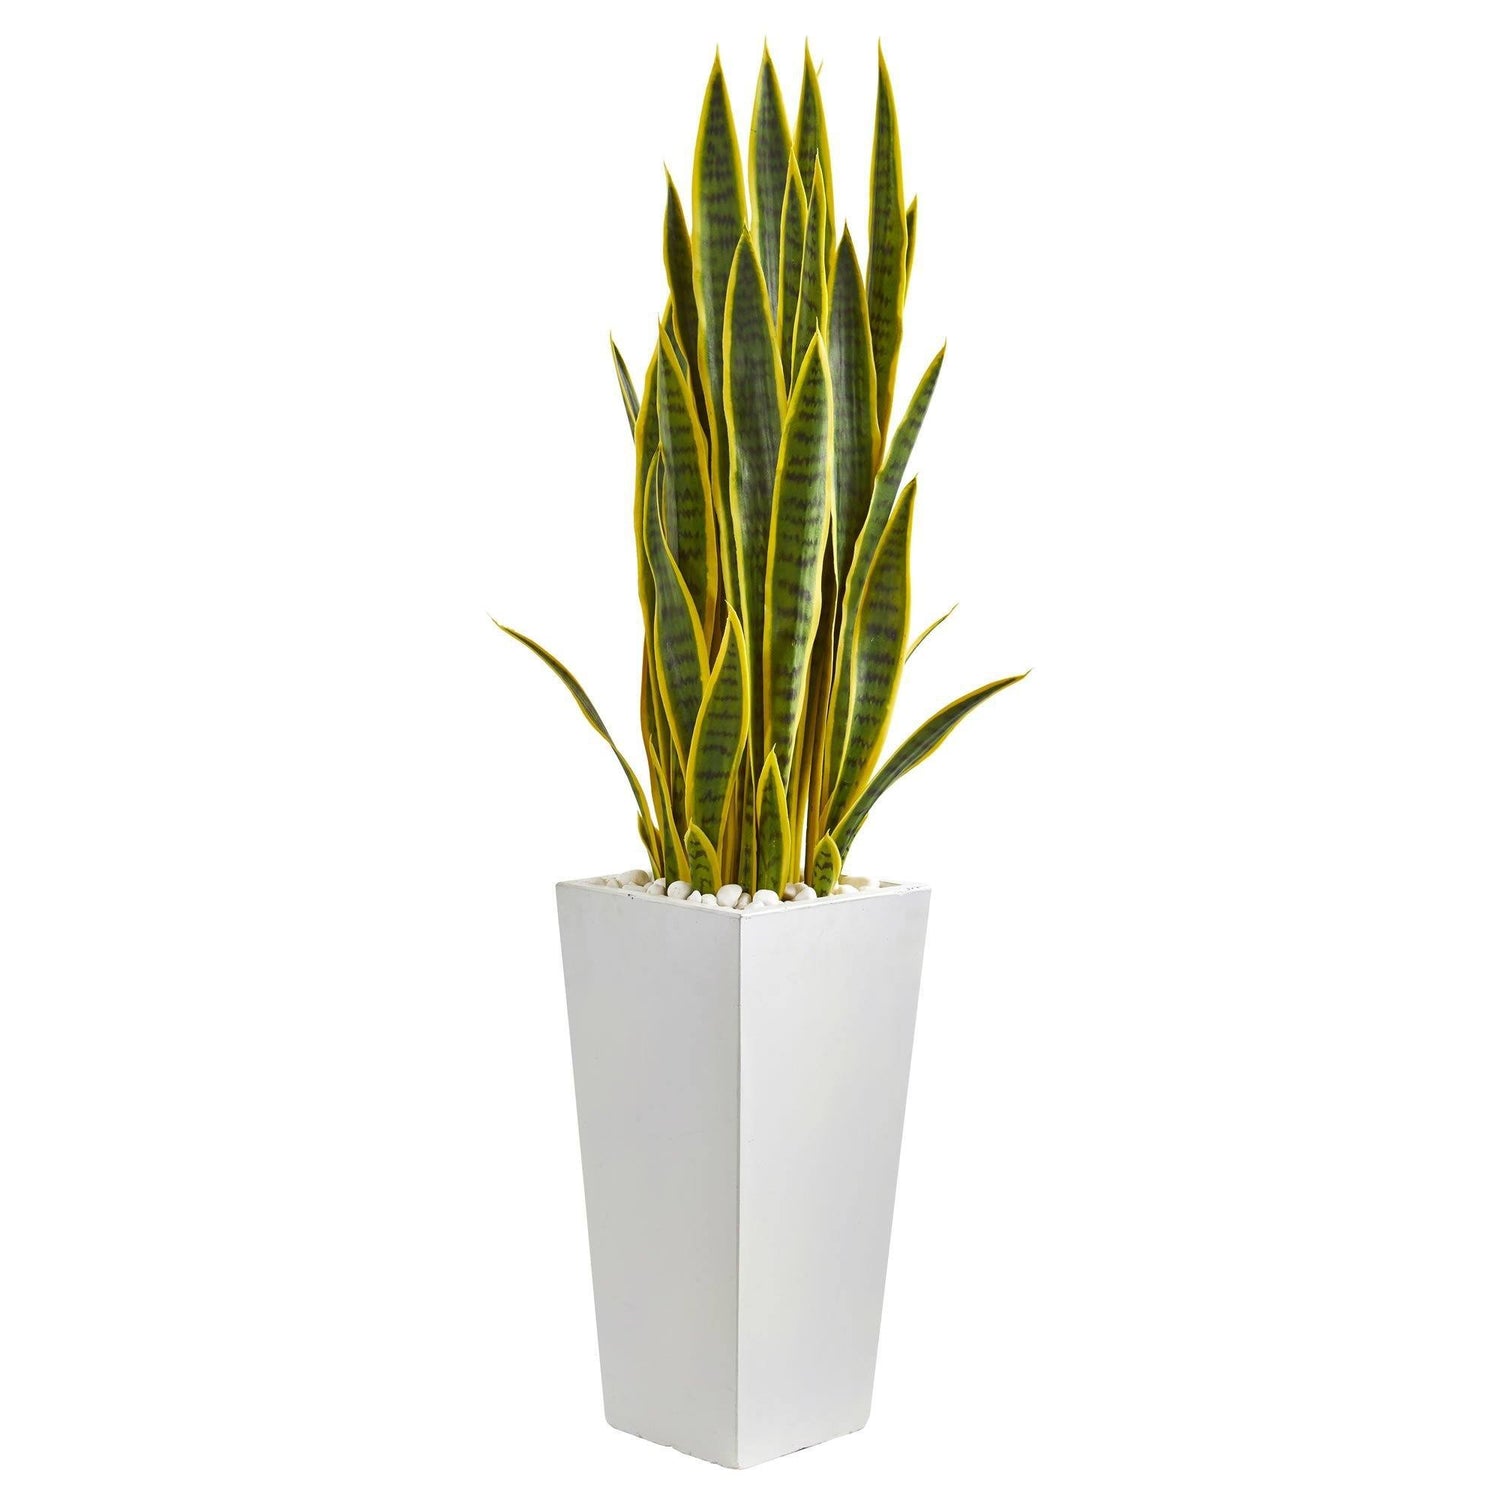 4’ Sansevieria Artificial Plant in White Tower Planter